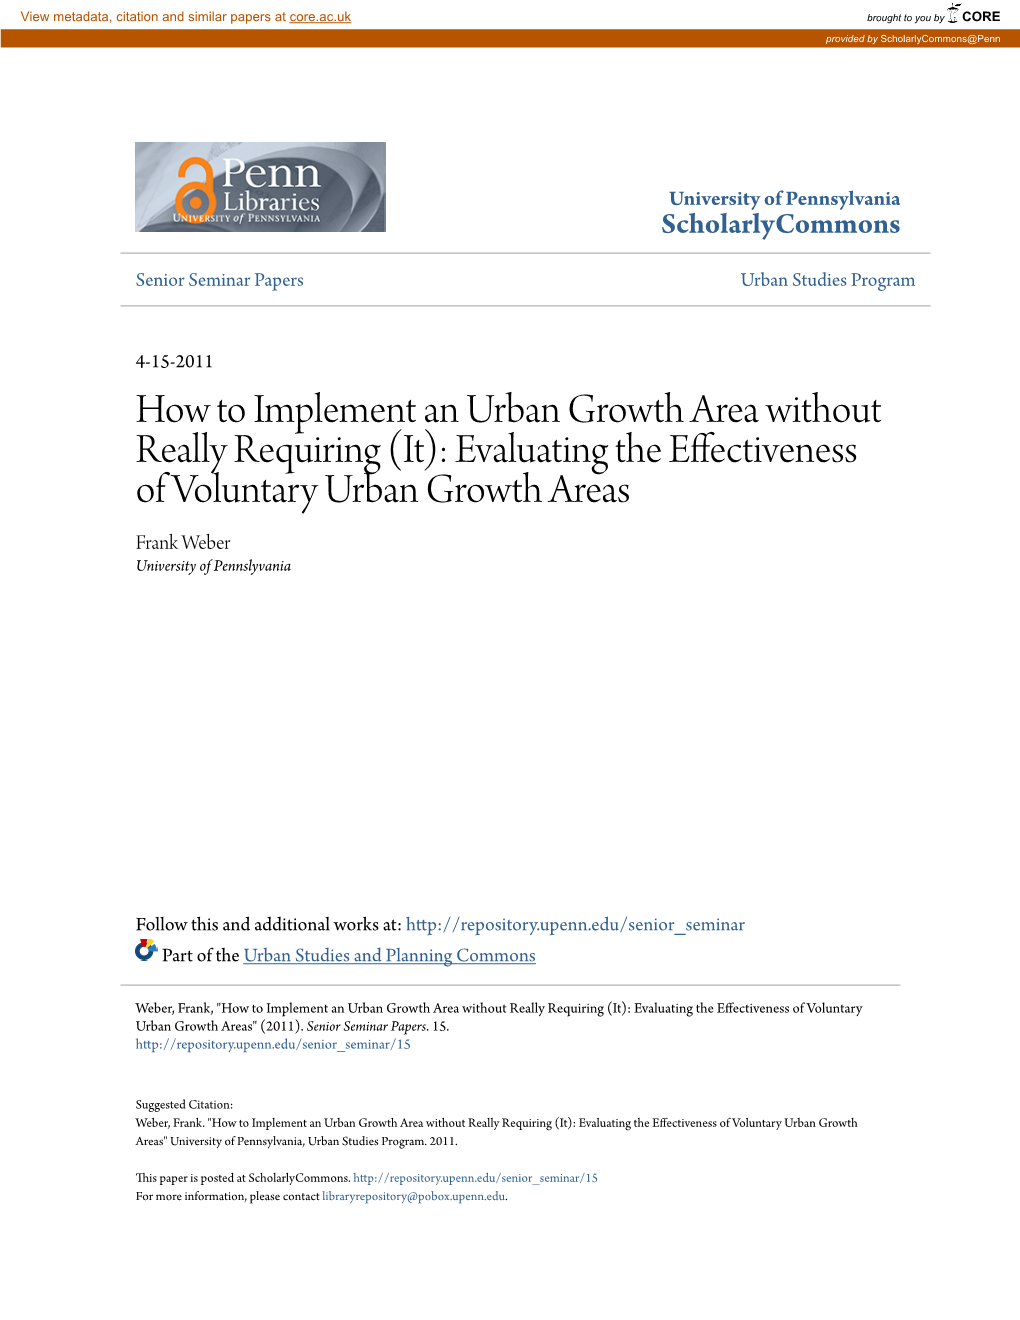 How to Implement an Urban Growth Area Without Really